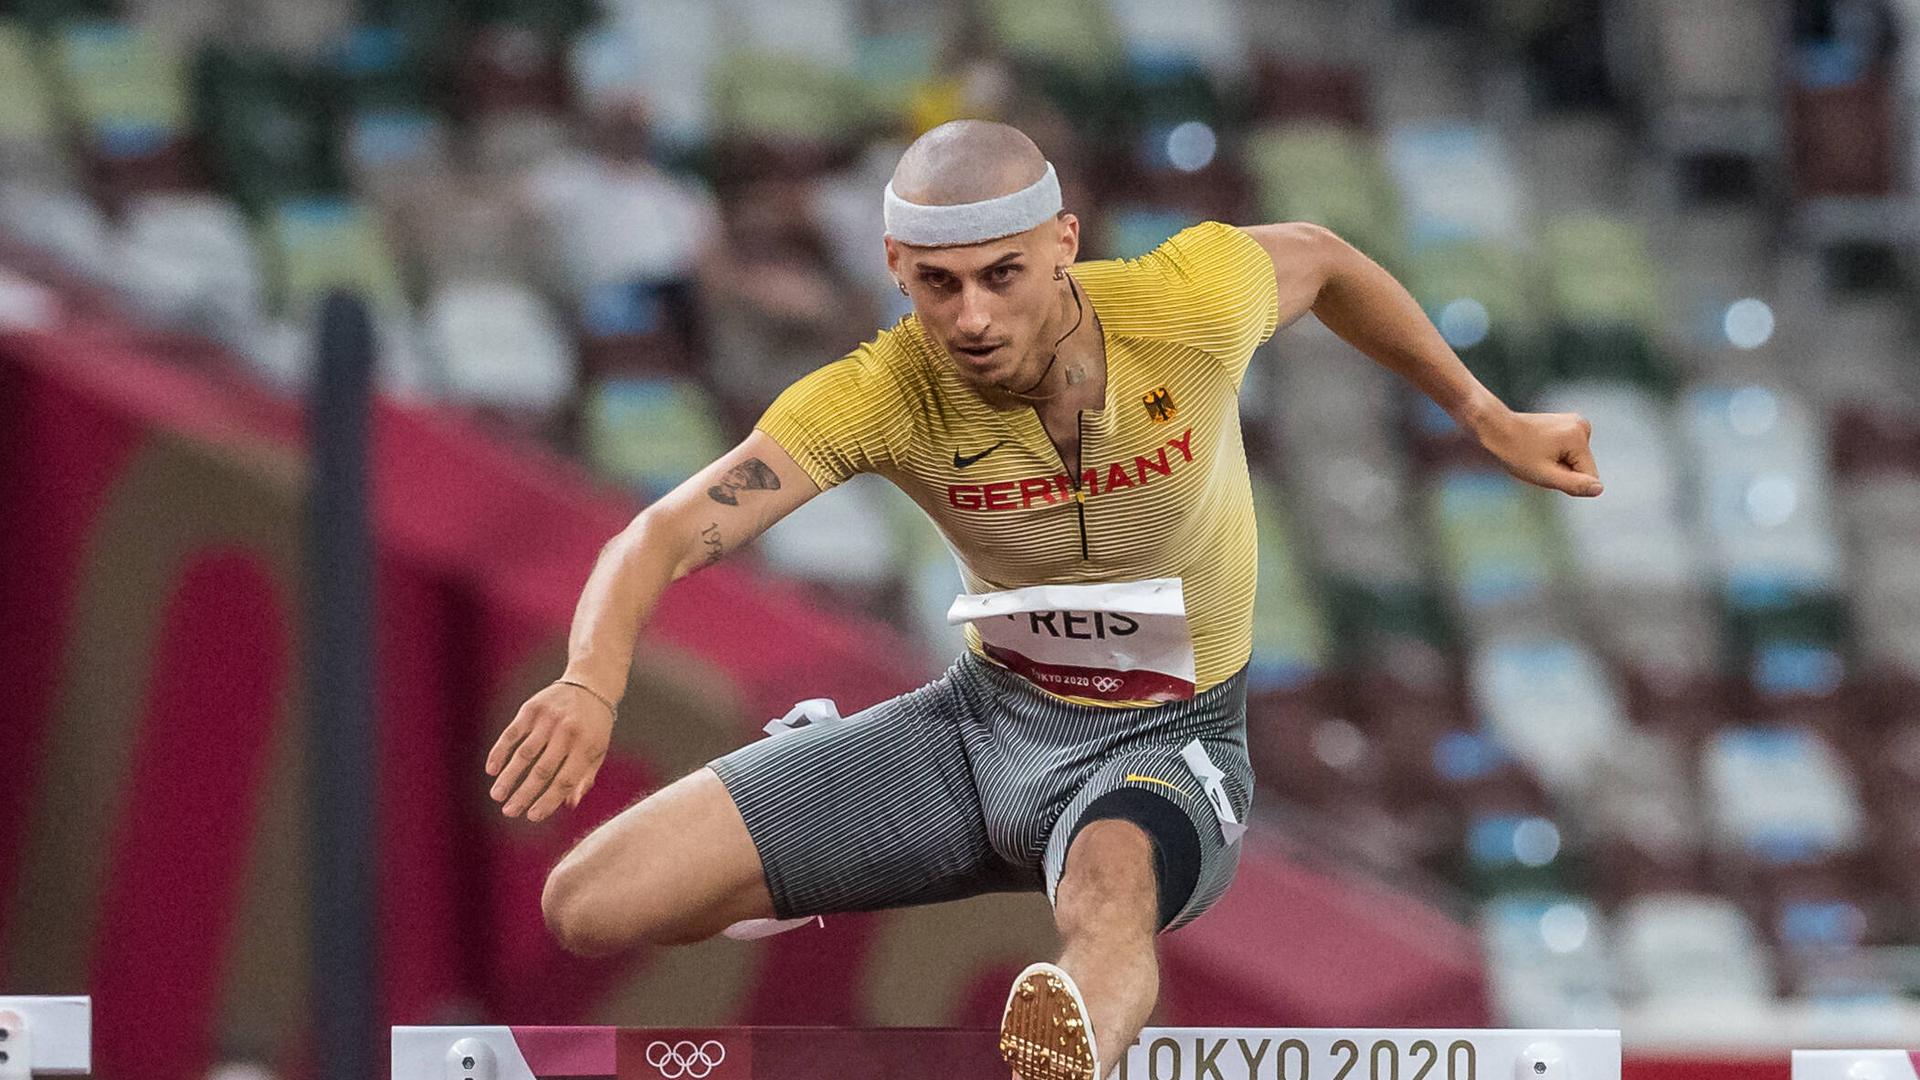  Olympic Games, Olympische Spiele, Olympia, OS 01.08.2021 Constantin Preis of Germany races in the mens 400 m hurdles semi final at the Olympic Games in Tokyo, on Sunday, August 01, 2021 Copyright: xBEAUTIFULxSPORTS/OlafxRellischx